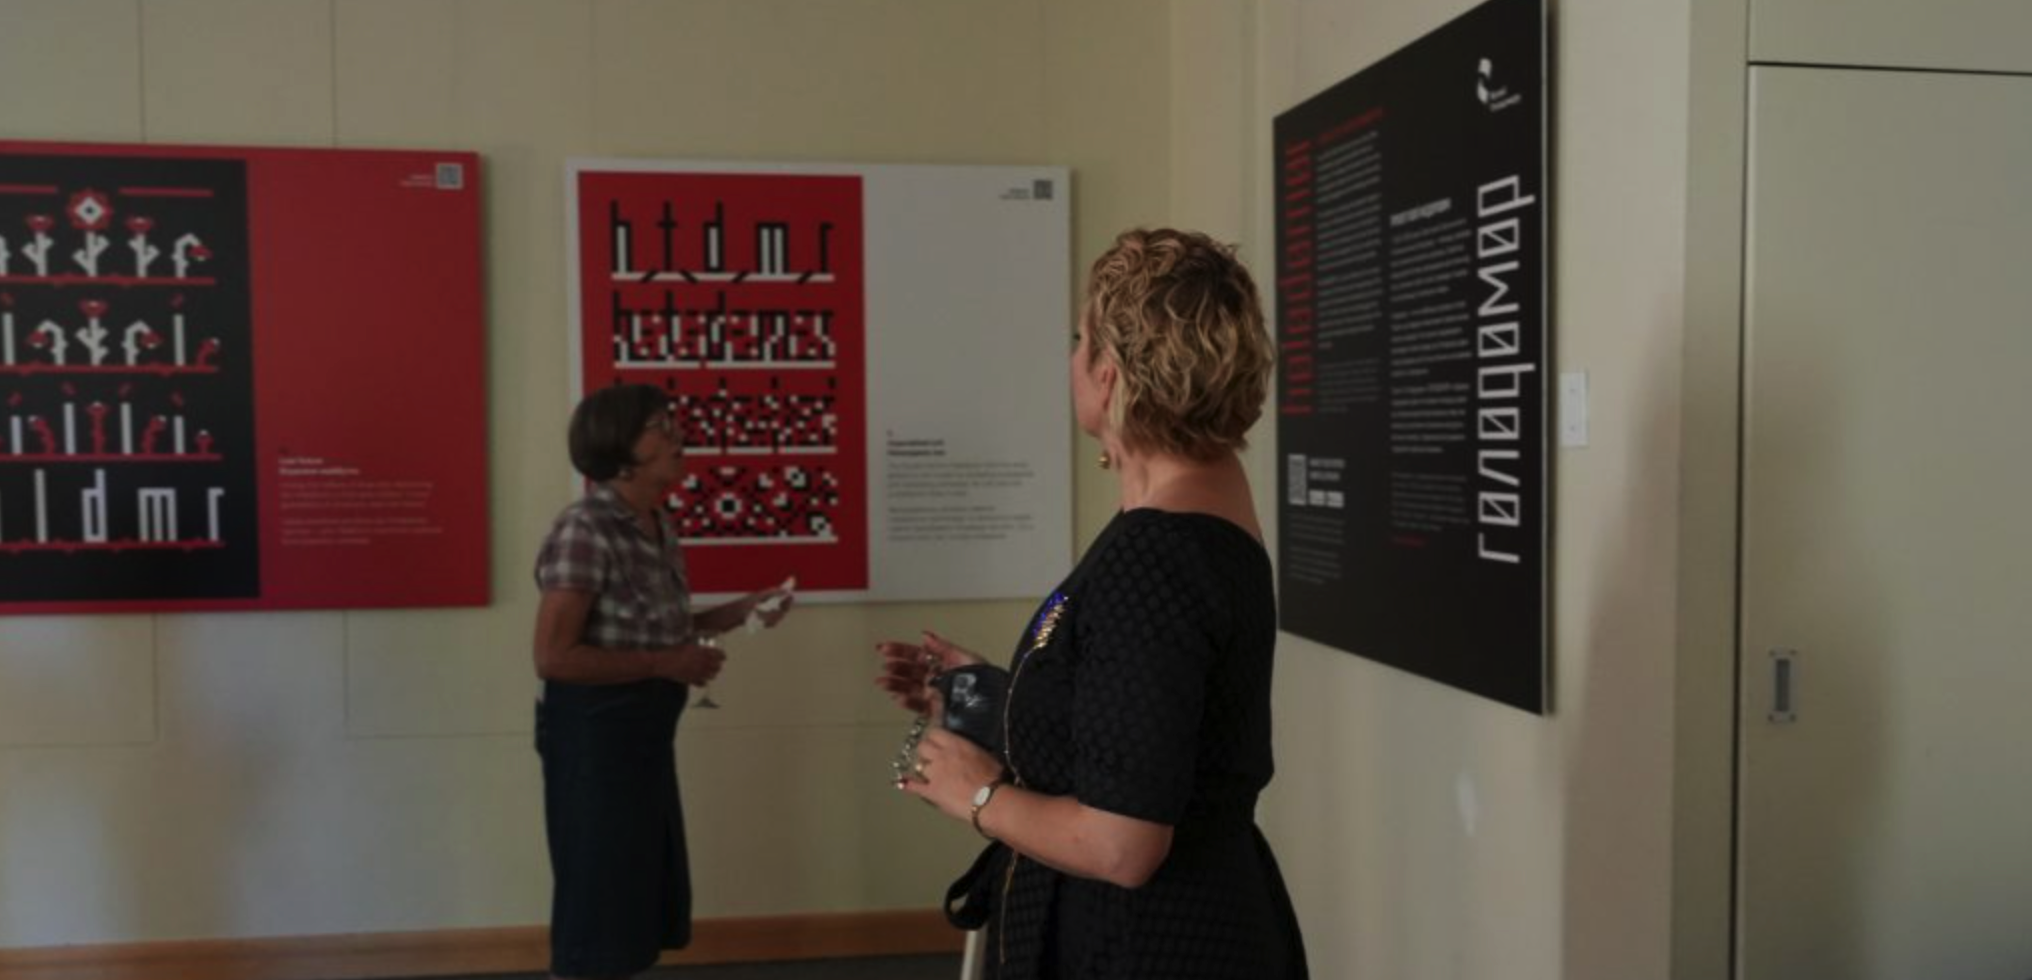 Holodomor exhibition on display in South Africa